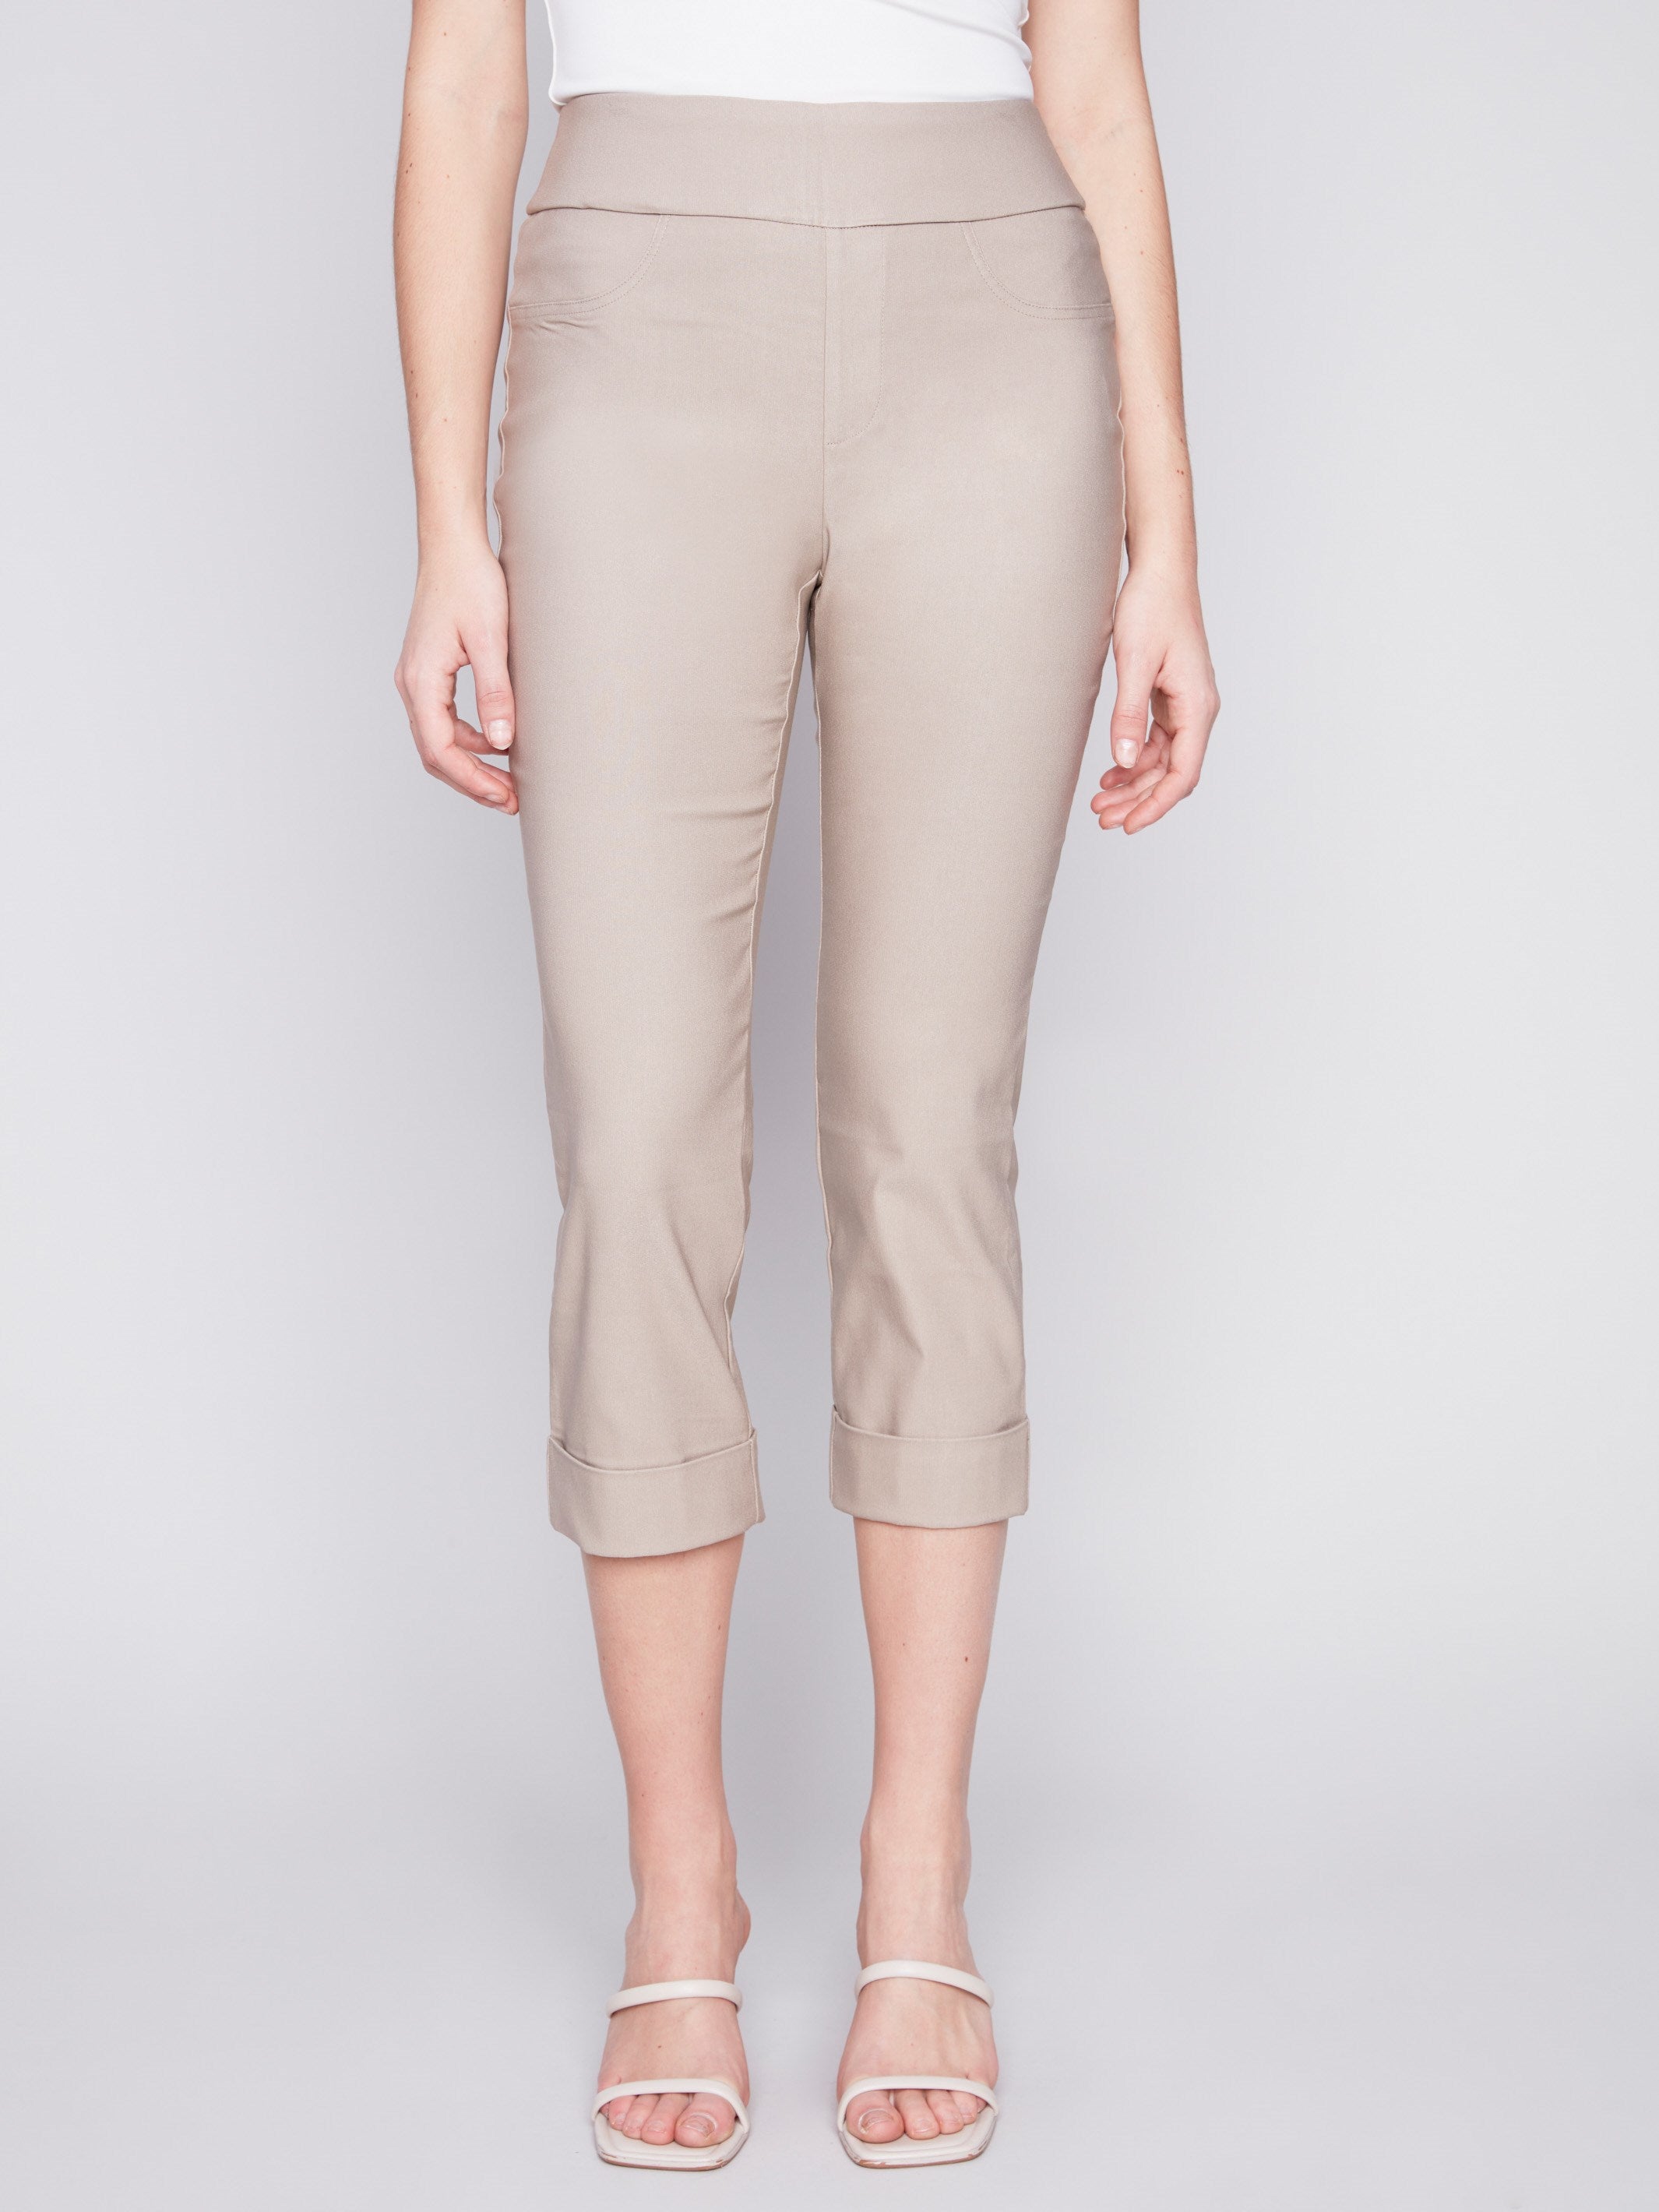 Stretch Pull-On Capri Pants - Greige - Charlie B Collection Canada - Image 3